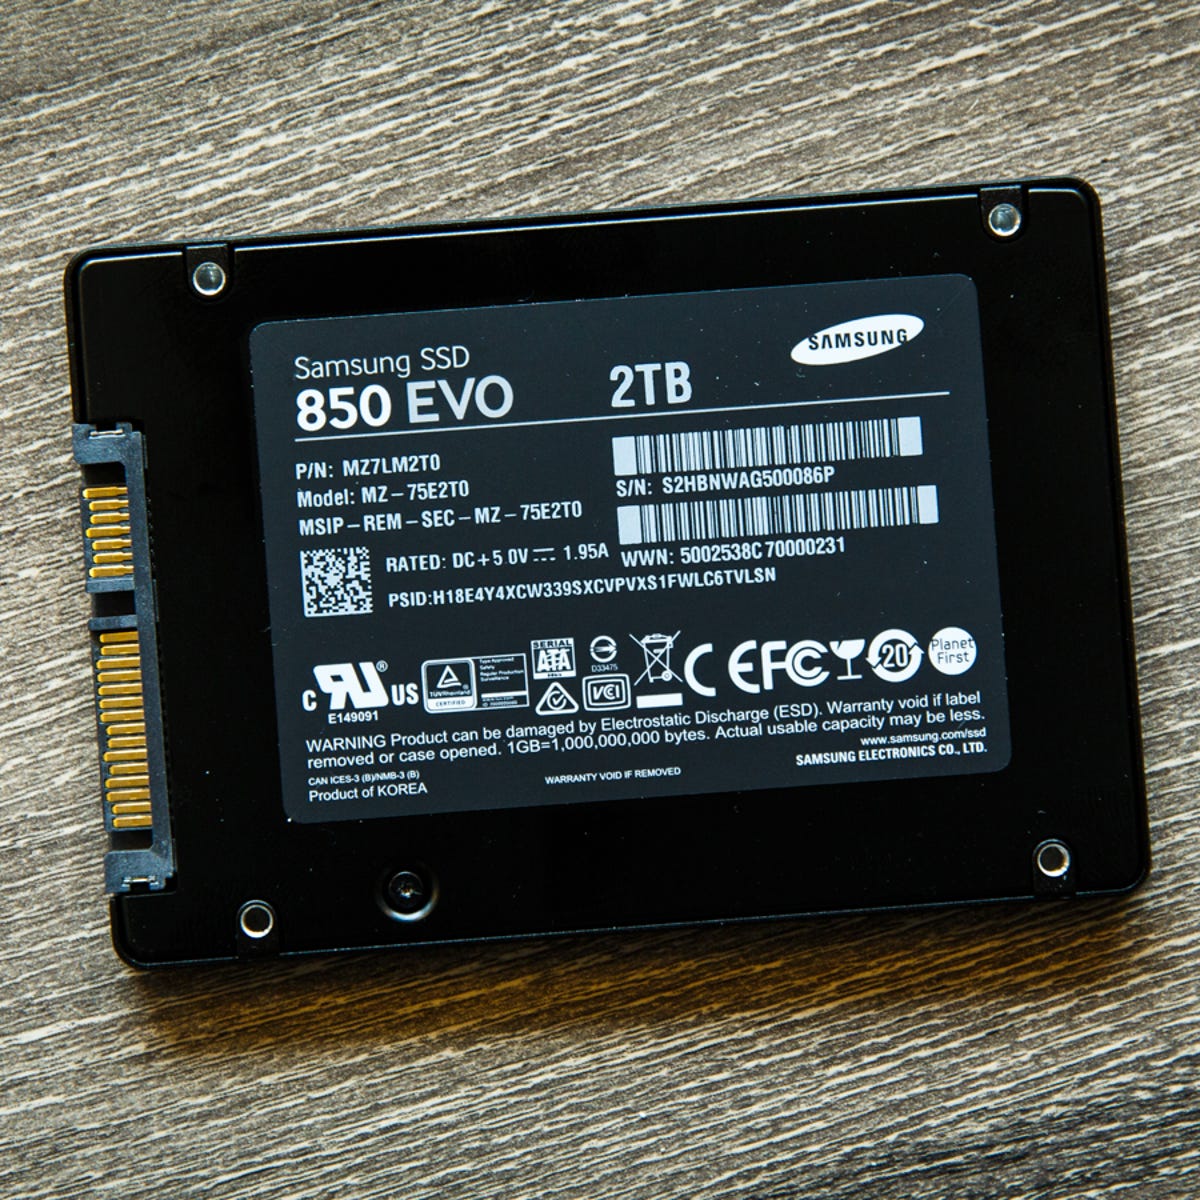 evigt transportabel marmor Samsung SSD 850 Evo review: Top performance for a low price - CNET